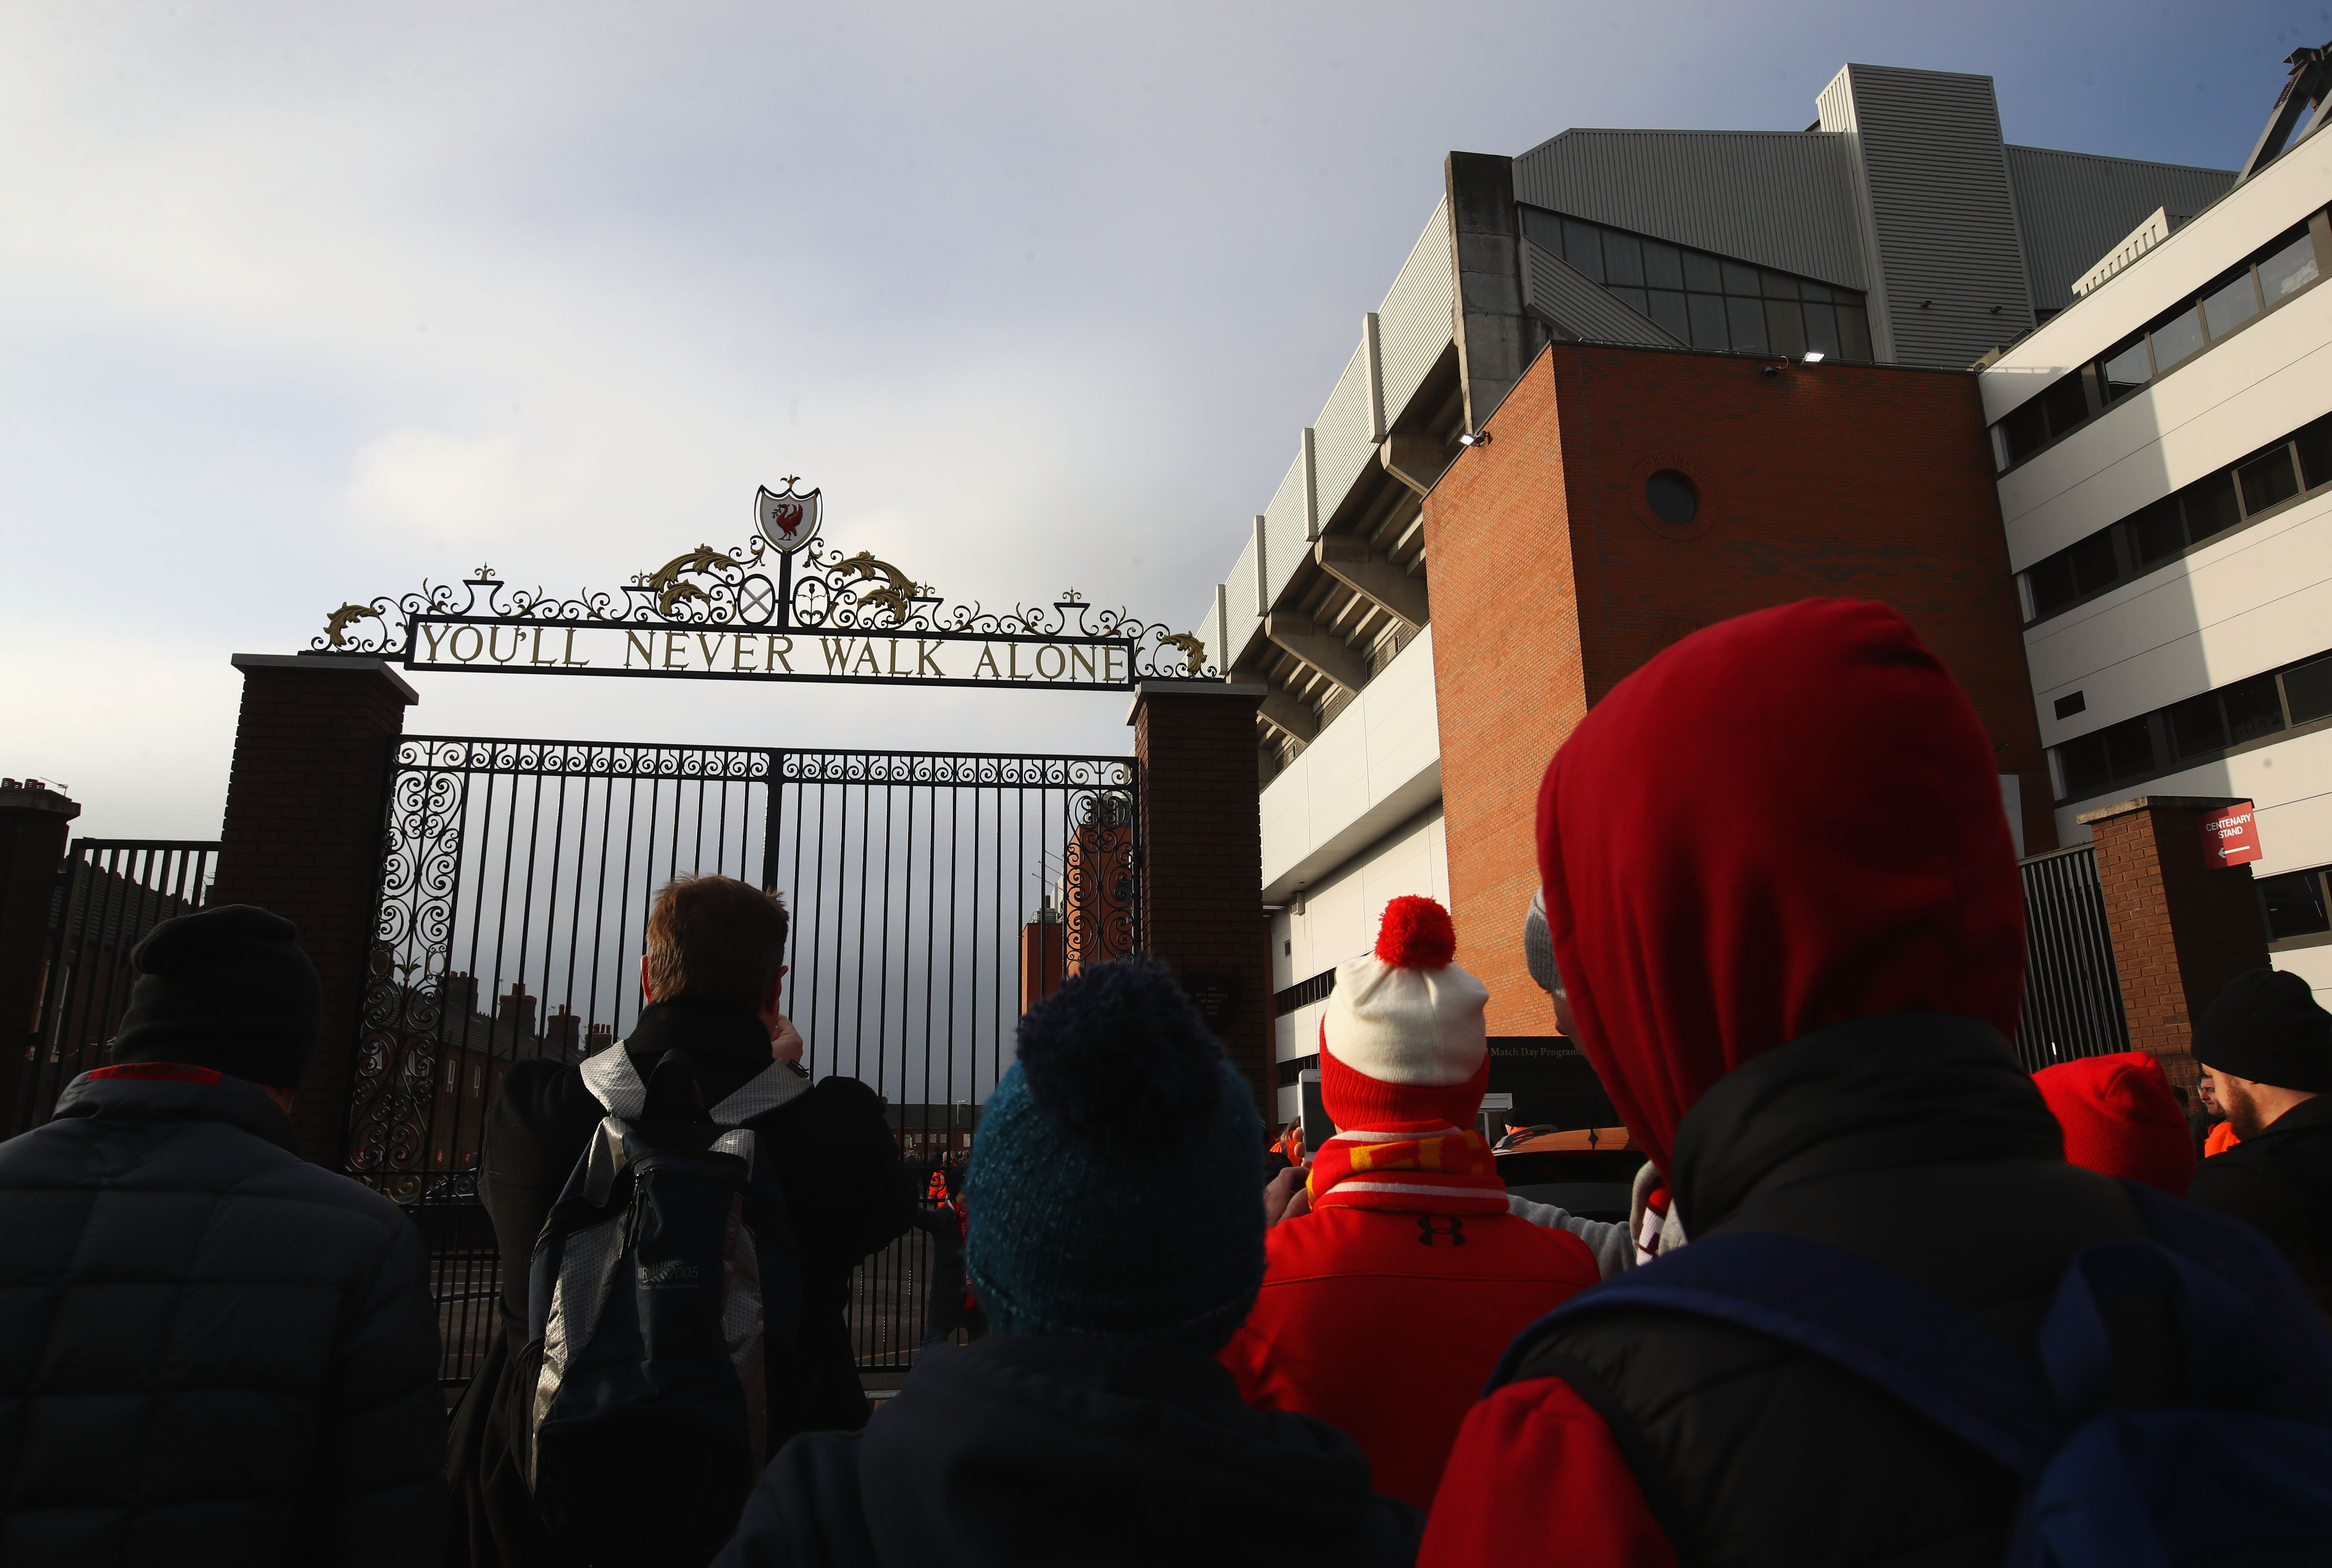 LIVERPOOL, ENGLAND - JANUARY 21: Fans wait outside the stadium prior to the Premier League match between Liverpool and Swansea City at Anfield on January 21, 2017 in Liverpool, England.  (Photo by Julian Finney/Getty Images)